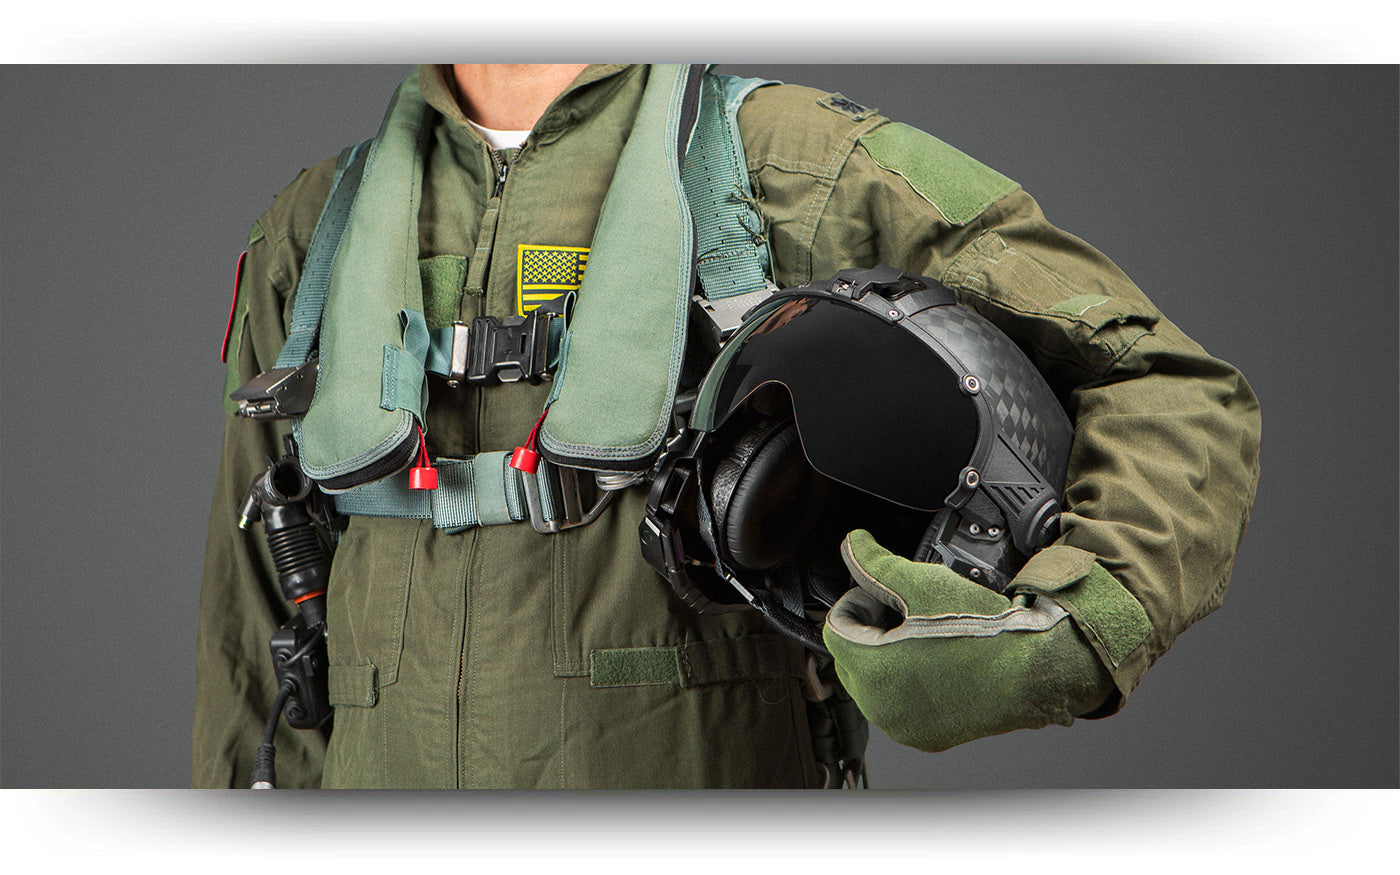 Introducing the All-New Next Generation Fixed Wing Helmet from LIFT Airborne